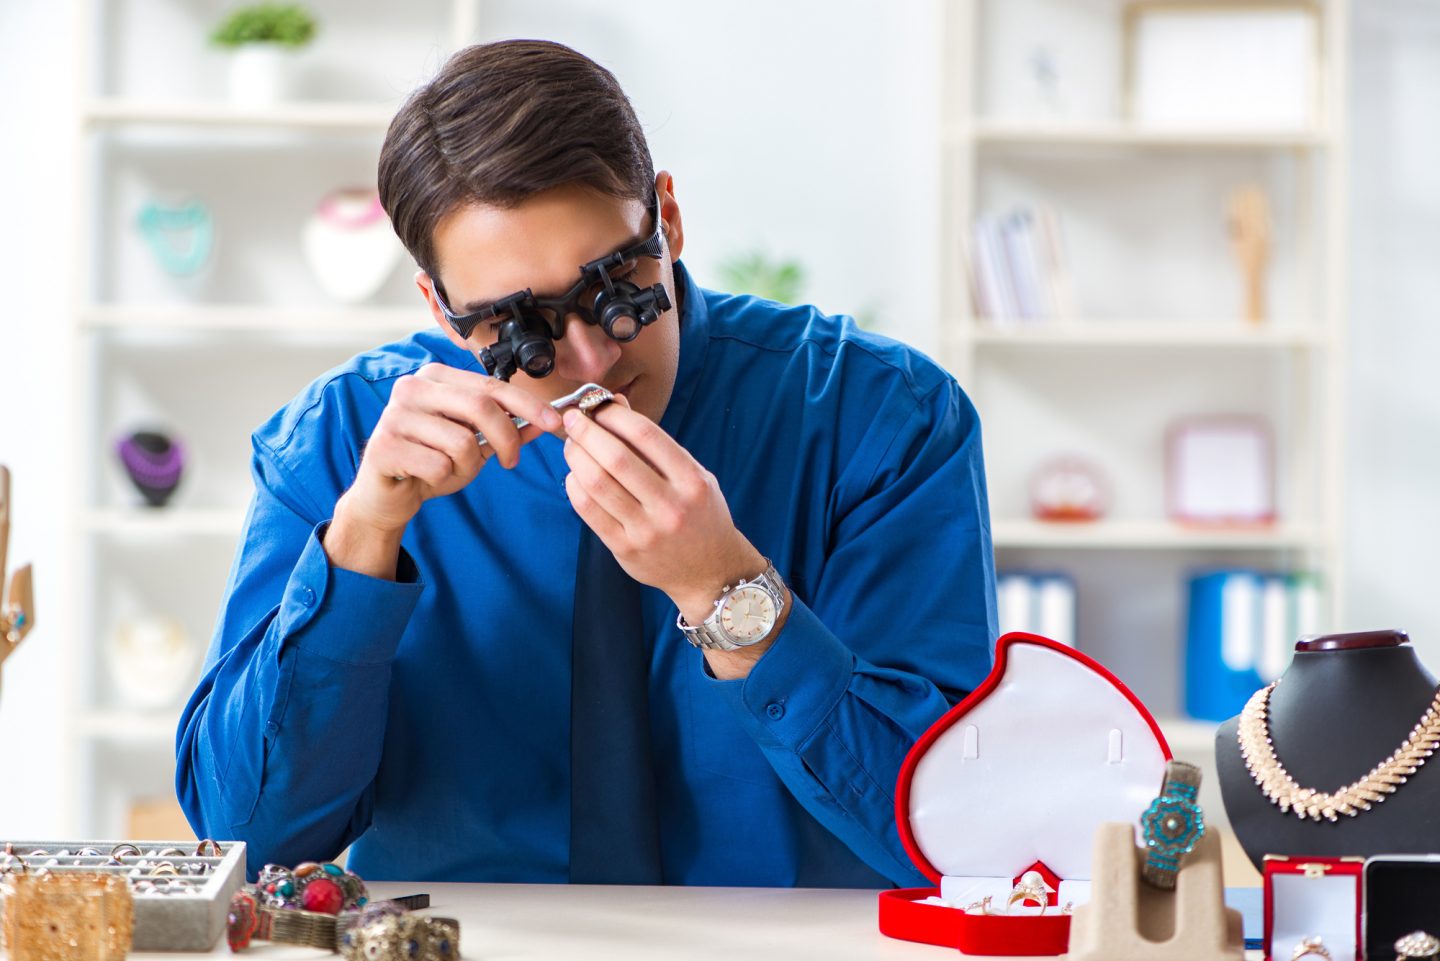 How to Find the Right Jewelry Repair Service